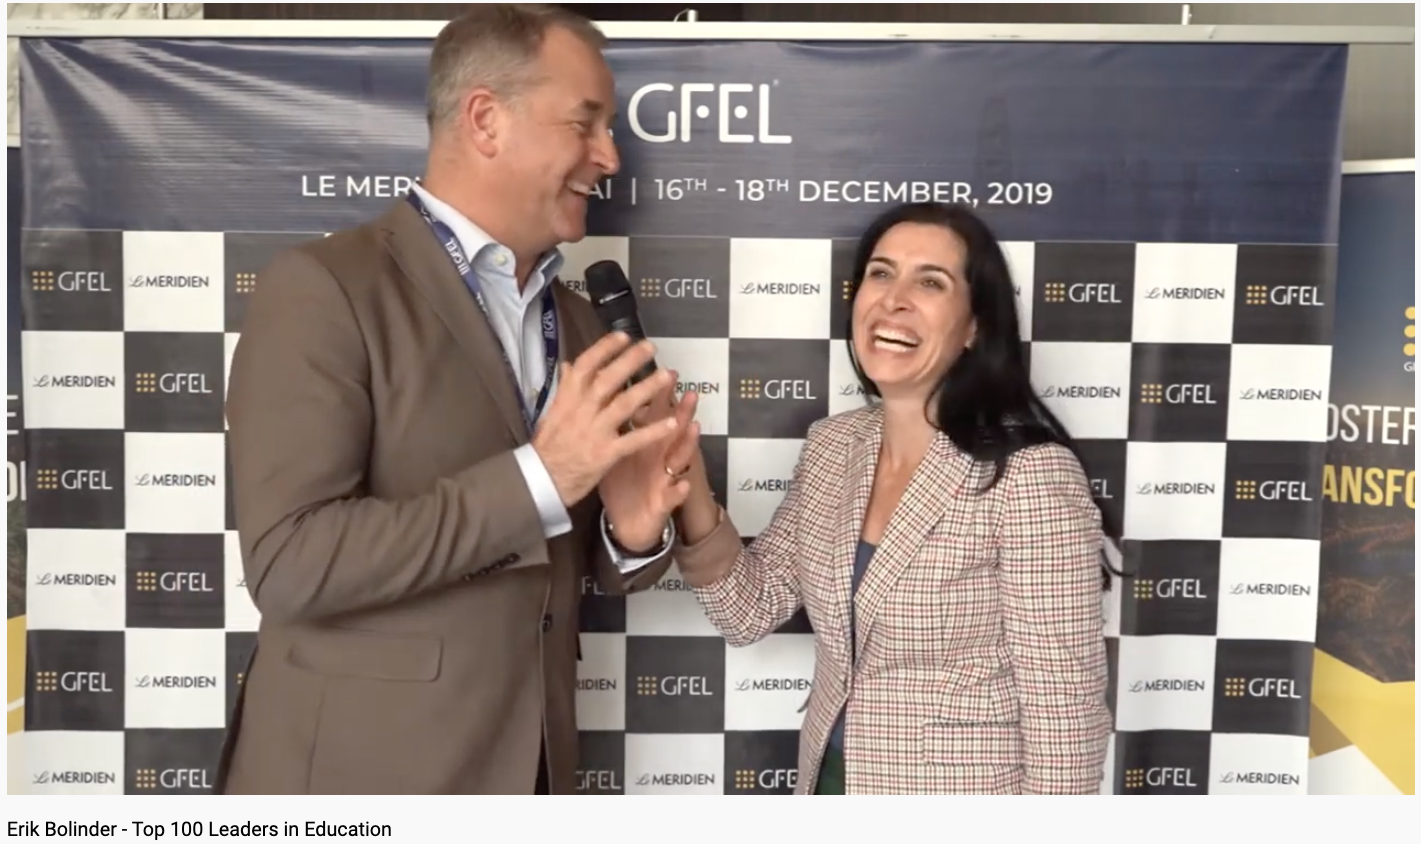 Video interview with GFEL awardee Erik Bolinder about Klick Data LMS